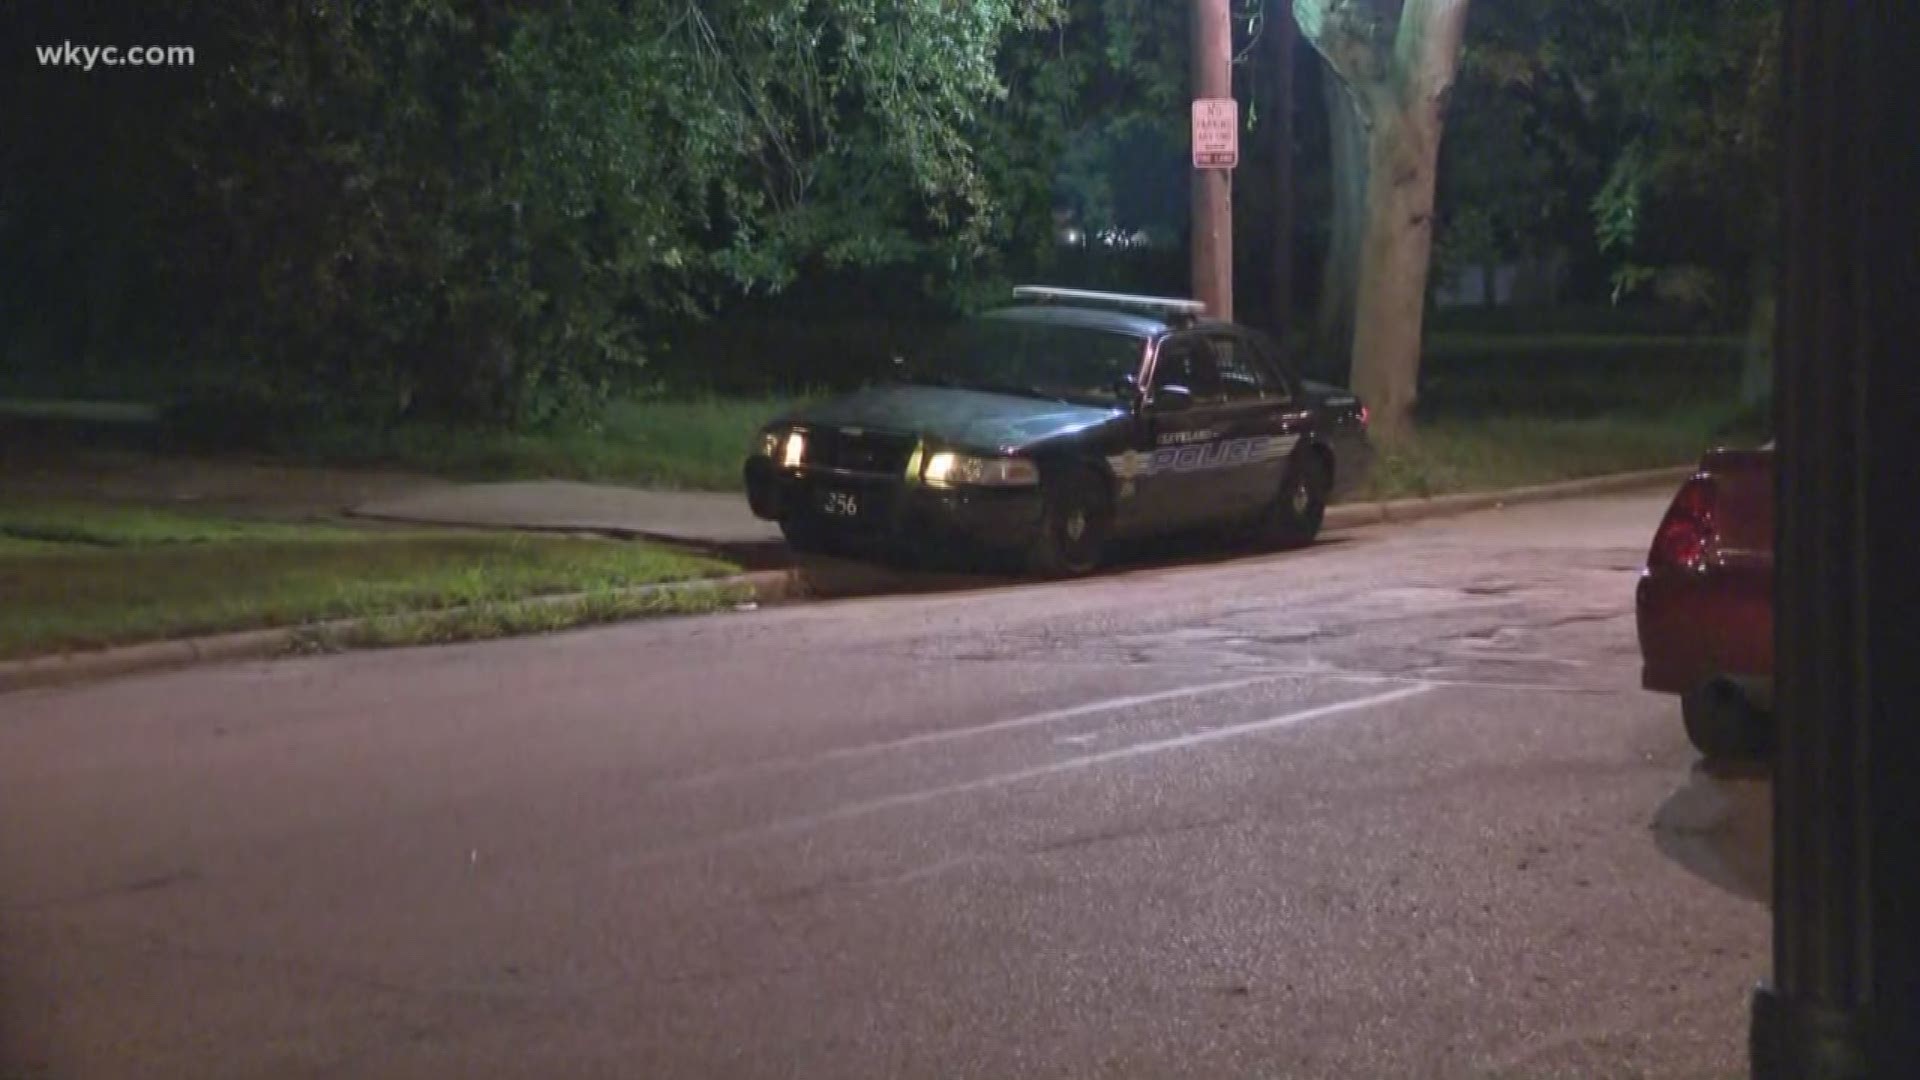 Sources tell WKYC that one person was arrested by officers at the mayor's house. A vehicle was also towed away.